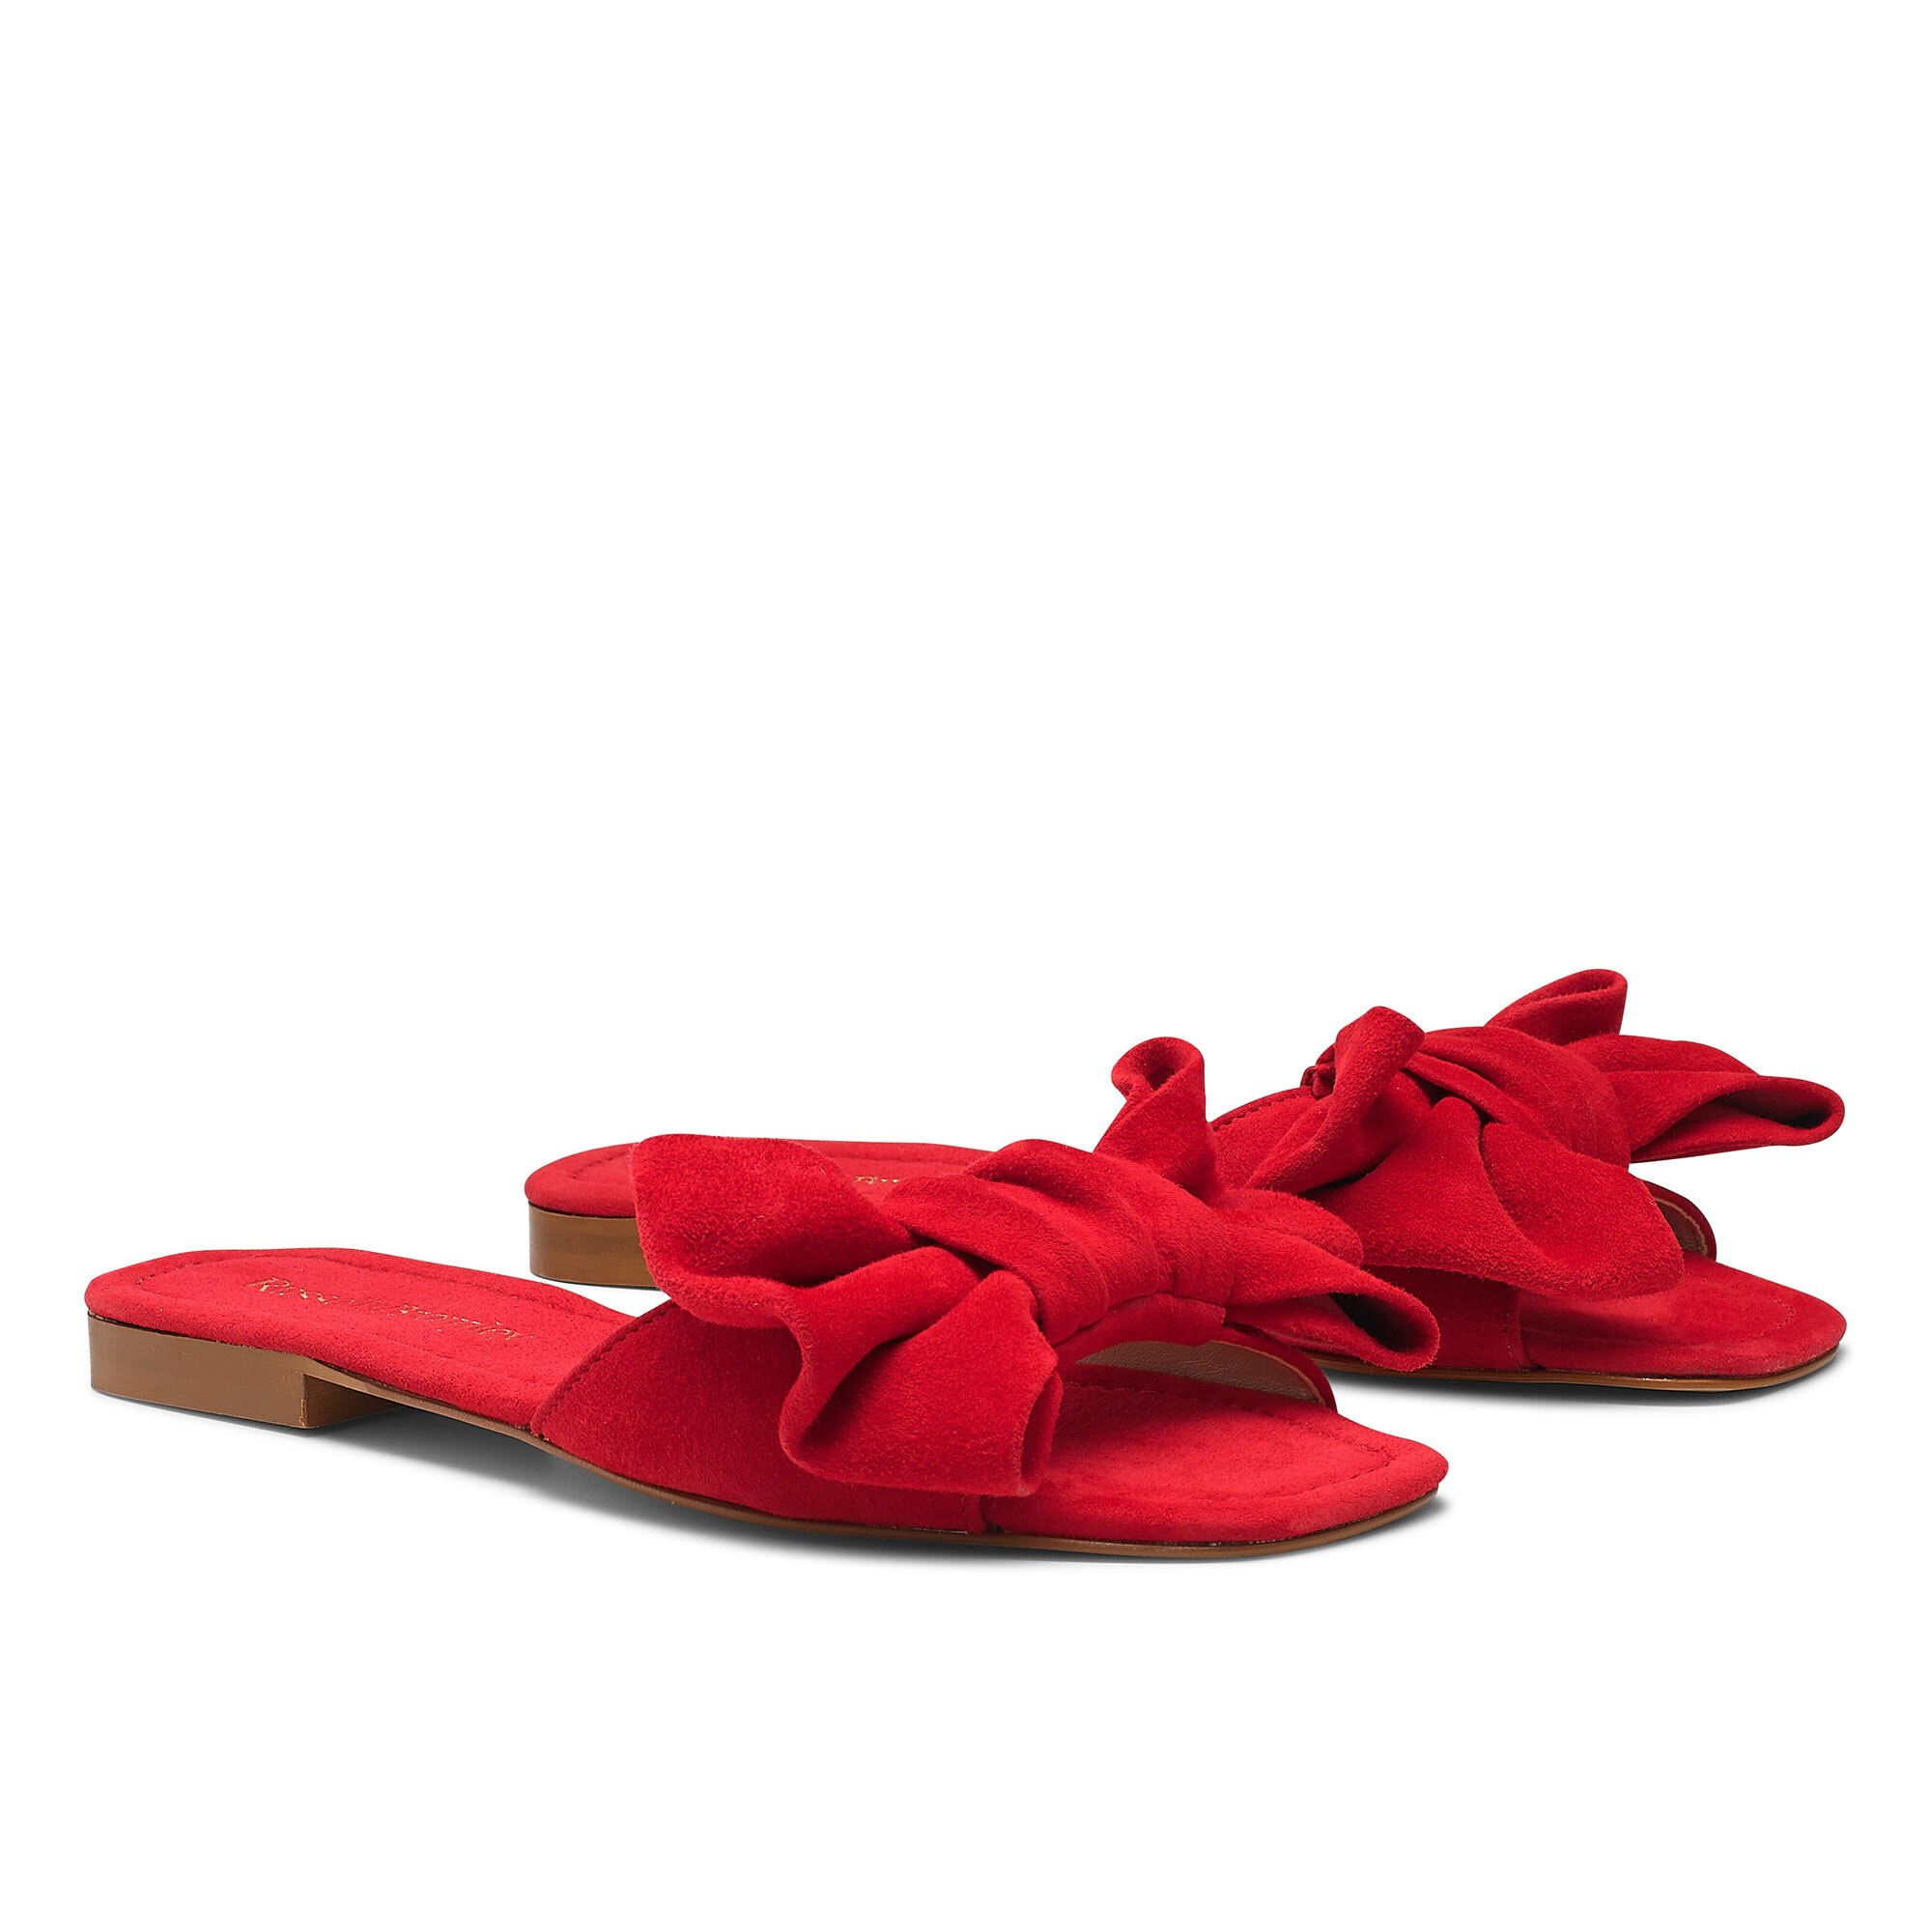 MINNIE Bow Trim Sandal in Red Suede | Russell & Bromley